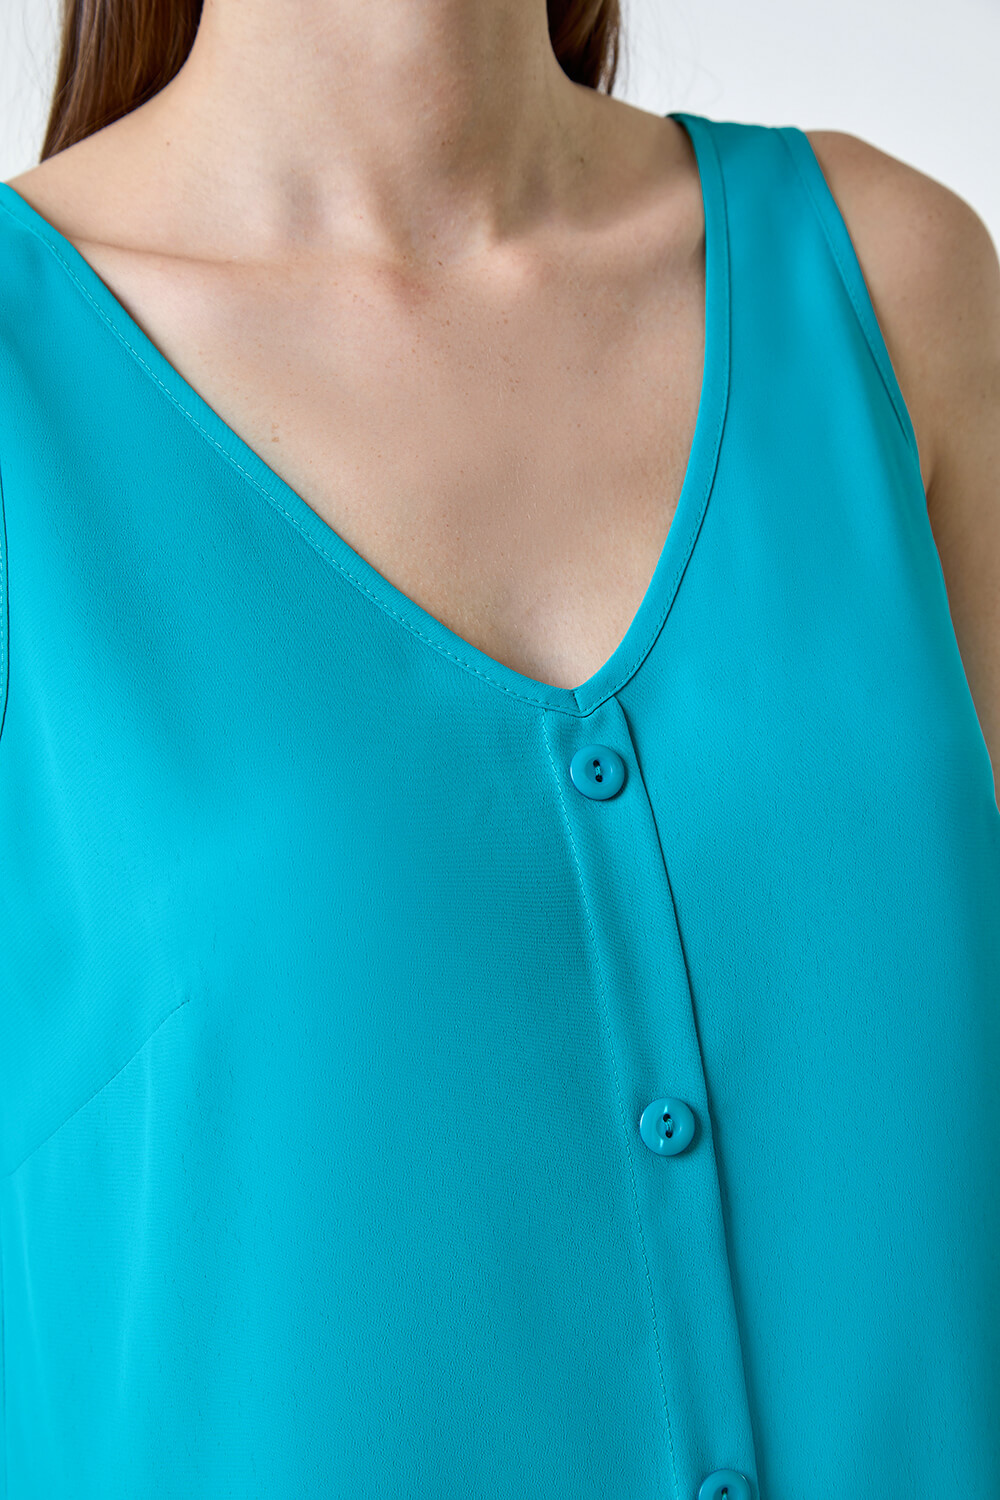 Teal Button Front Sleeveless Top, Image 5 of 5